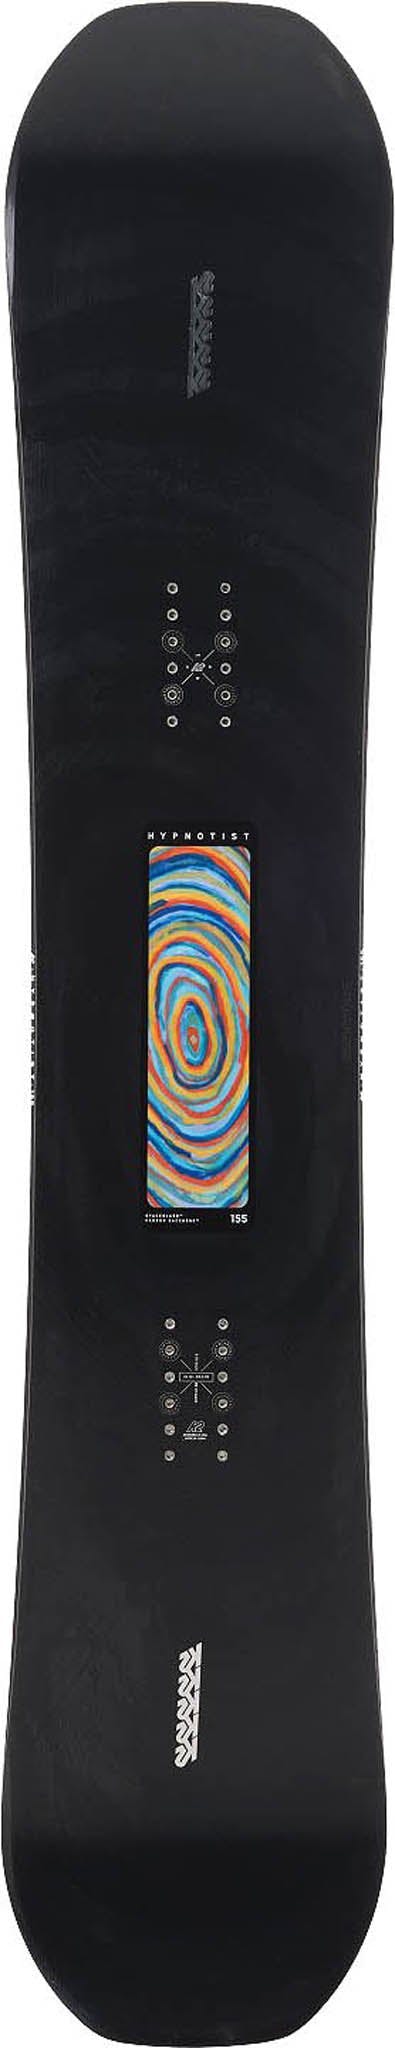 Product image for Hypnotist Snowboard - Men's